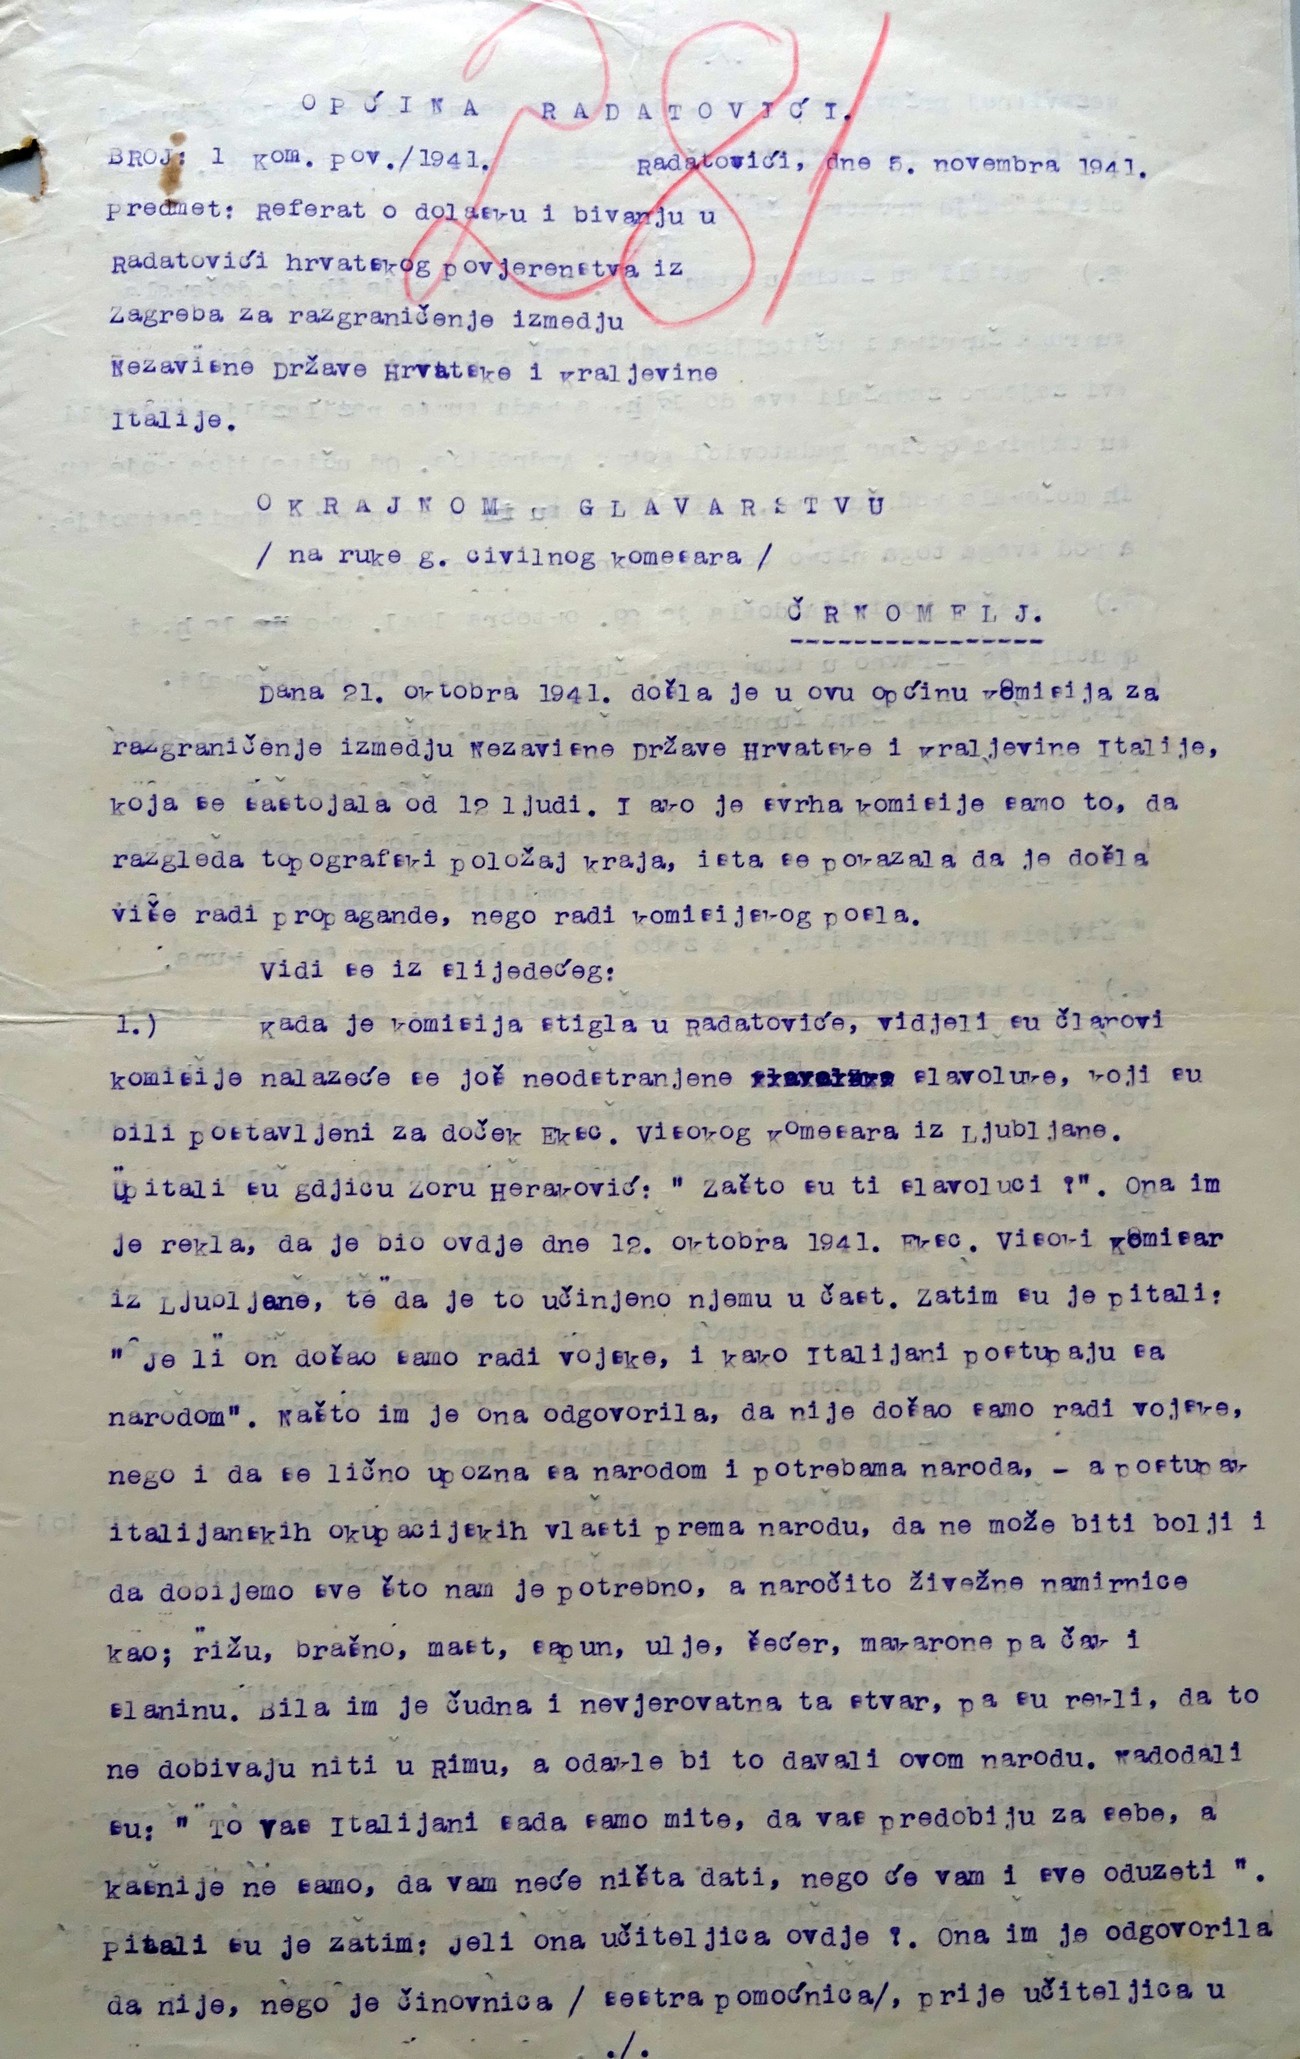 The first page of a report from the Municipality of Radatovići regarding the visit from the NDH Boundary Commission in Radatovići on 5 November 1941. The report states that the NDH Boundary Commission was in Radatovići on 21 October 1941 mainly due to propaganda and not due to topography or boundary-related matters between the Kingdom of Italy and the NDH. It mentions that the commission was interested only in the people's state of mind, for instance in why a triumphal arch had been erected in Radatovići in honour of the high commissioner from Ljubljana, etc. Archives of the RS.